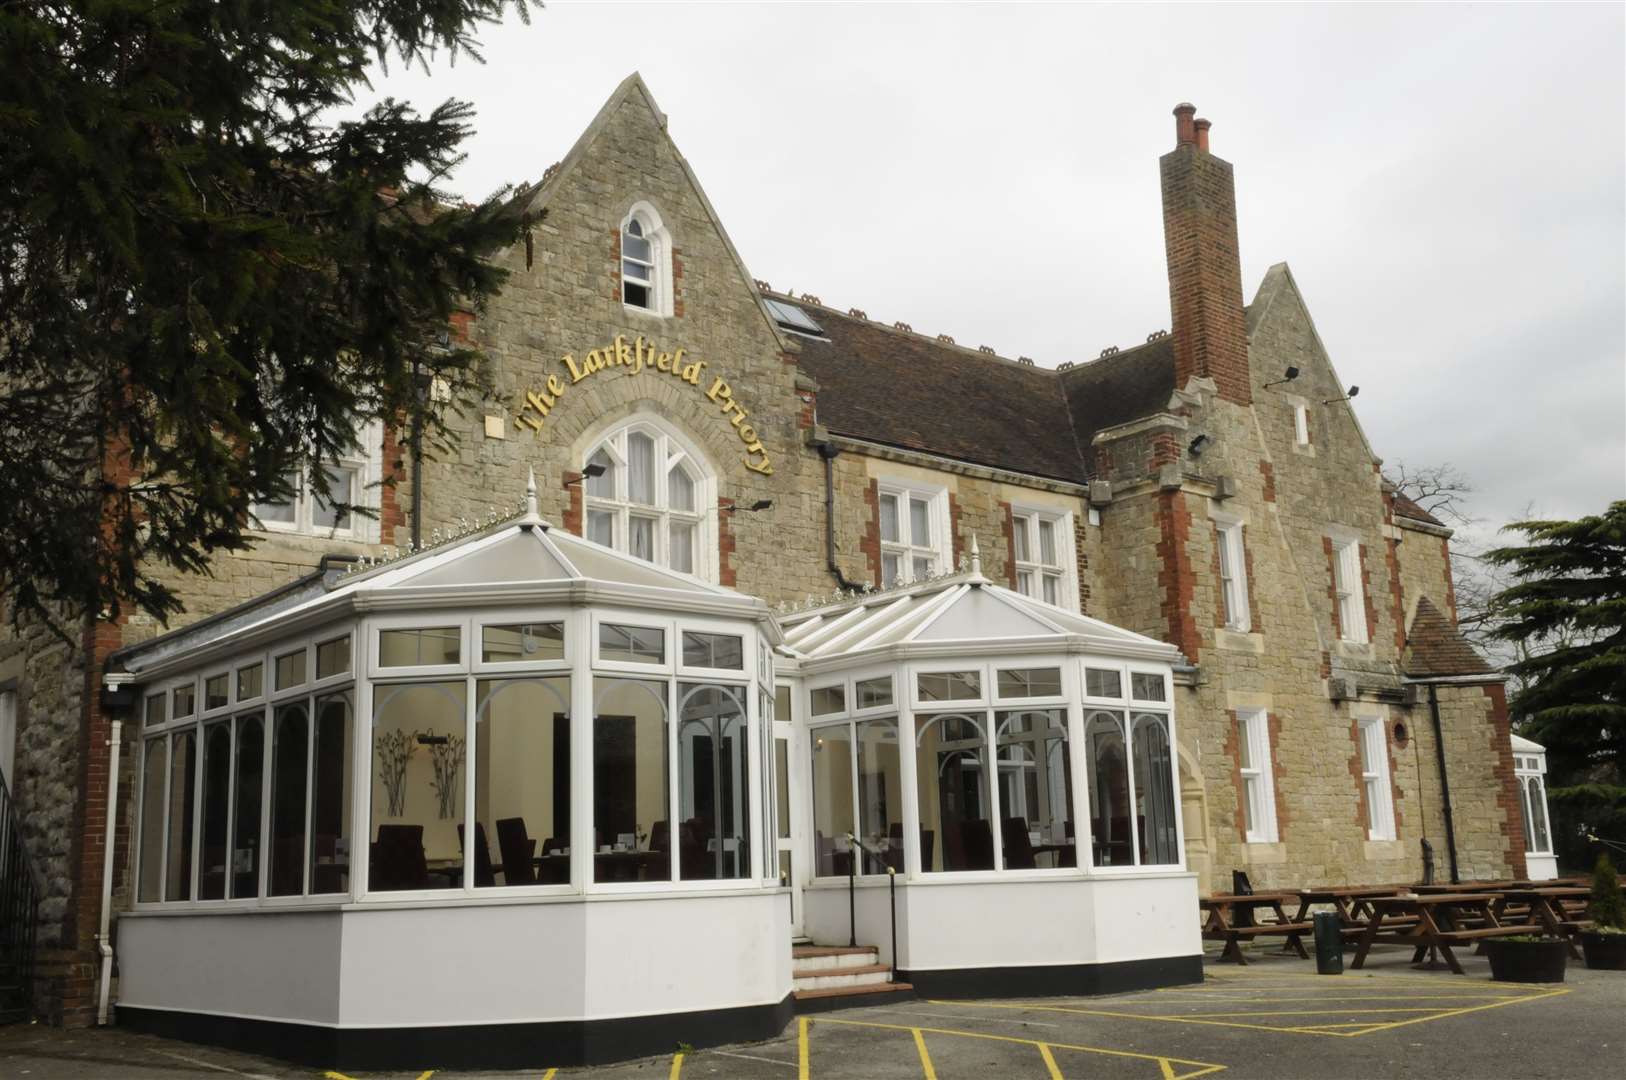 Larkfield Priory Hotel in London Road, Aylesford, cancelled the pair's wedding reception